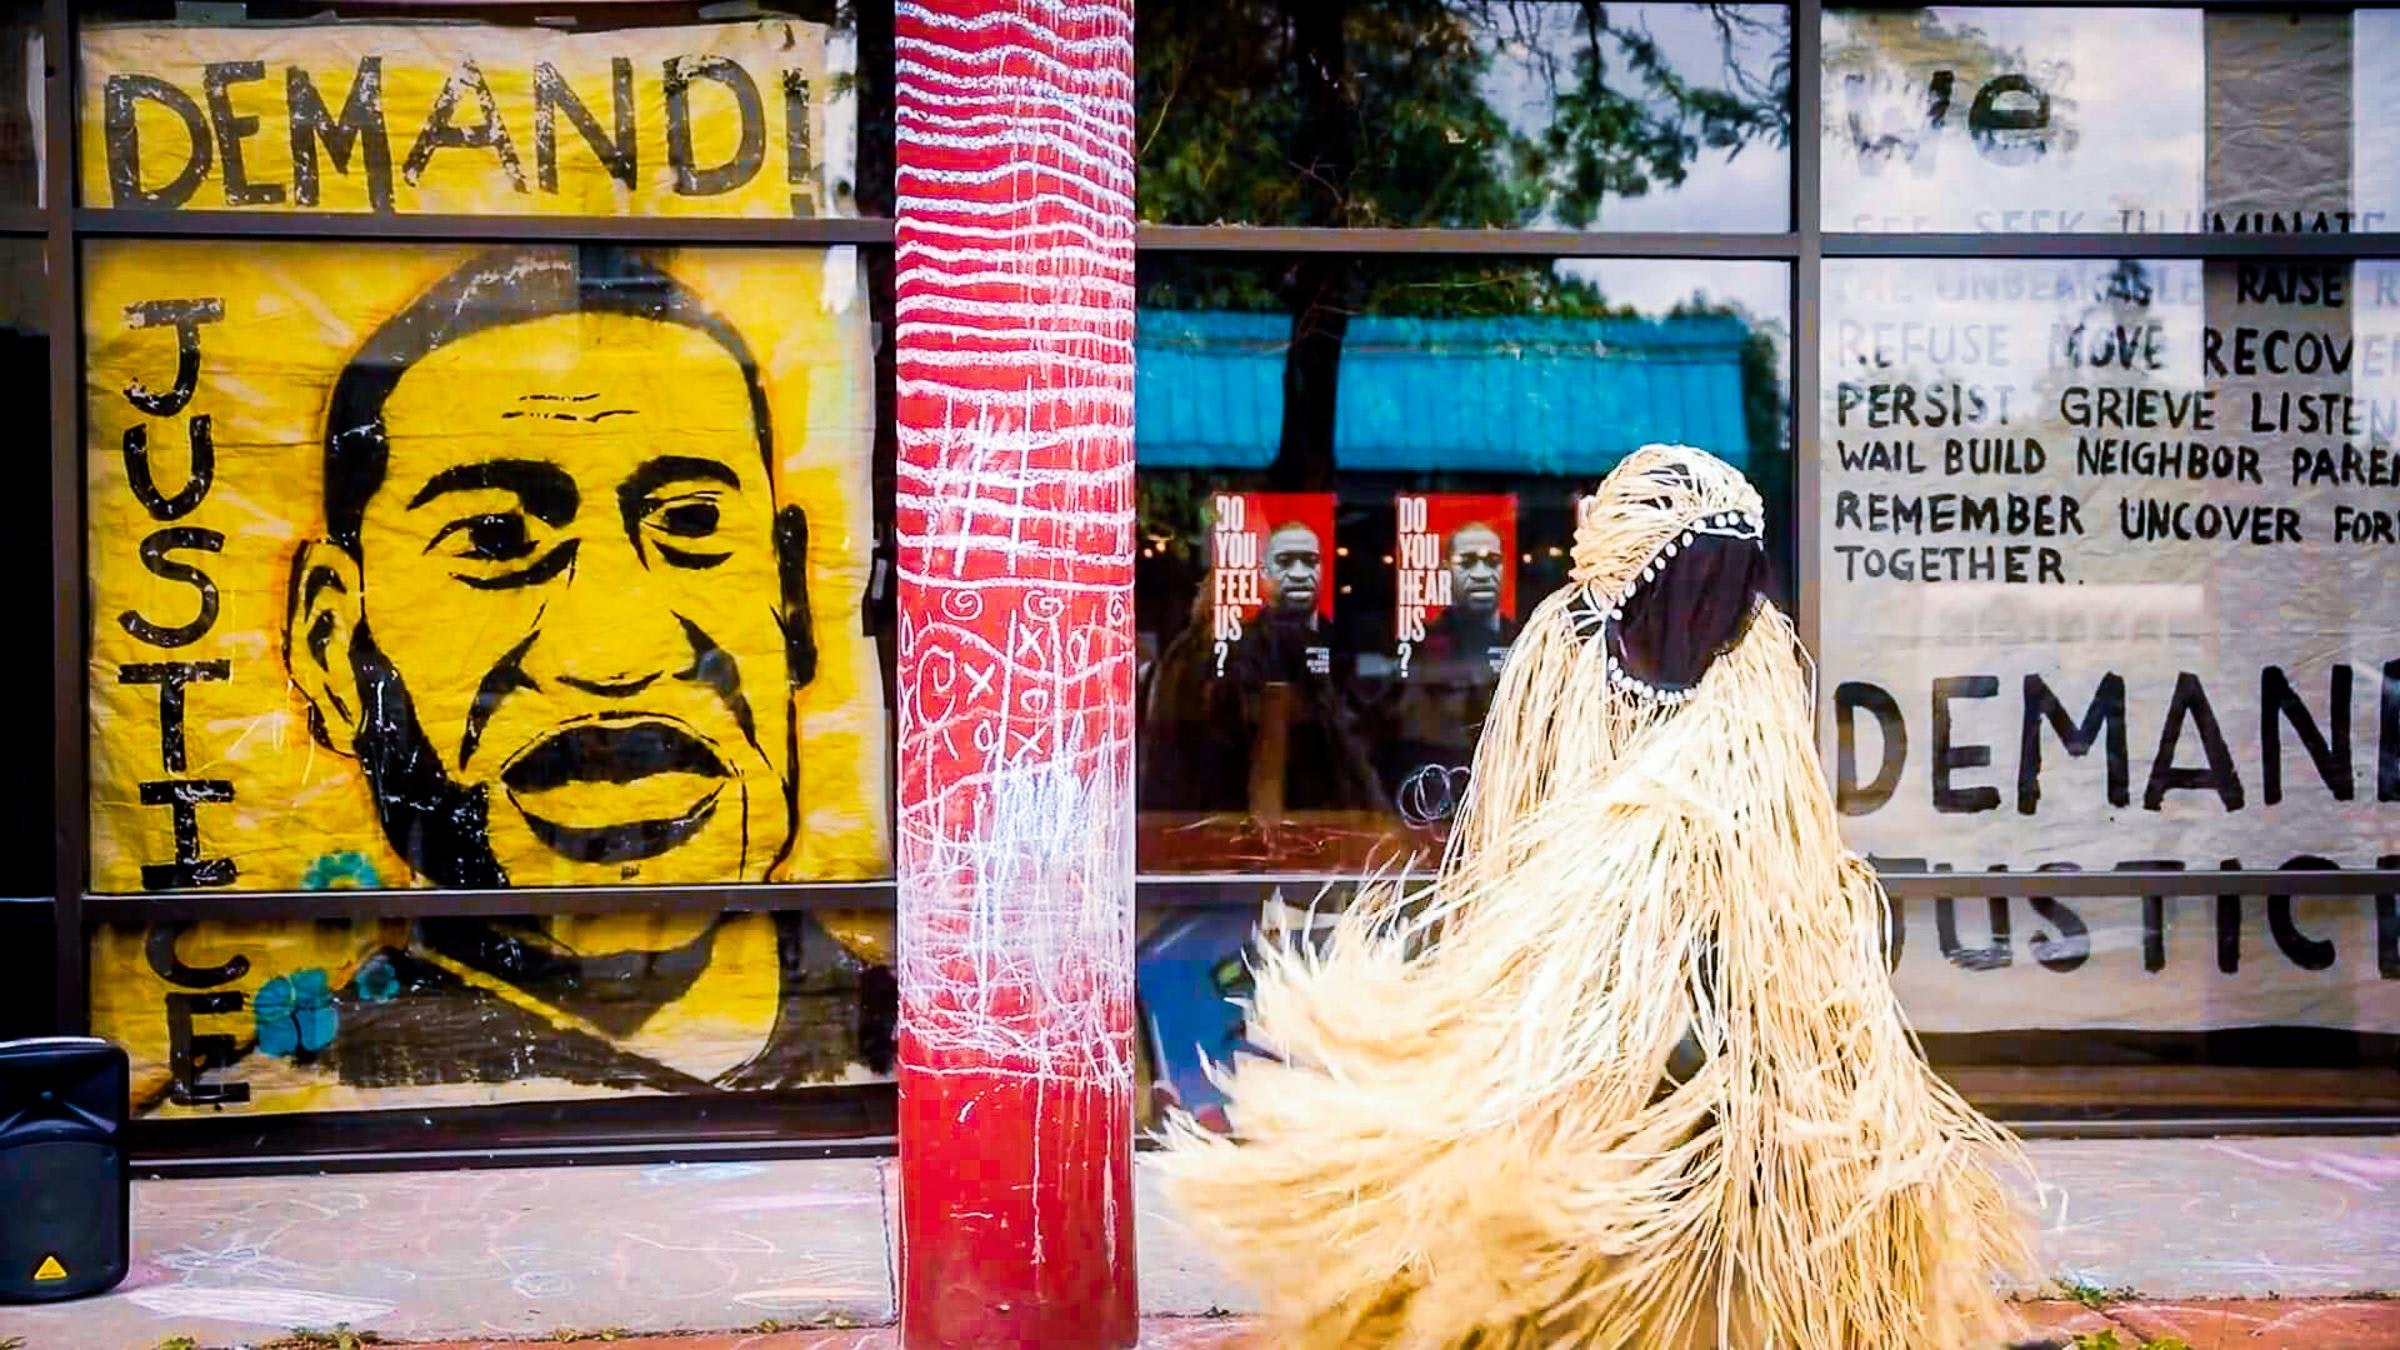 A person in a costume made of strips of straw stands outside next to a mural that reads "demand justice" and has a picture of George Flyod